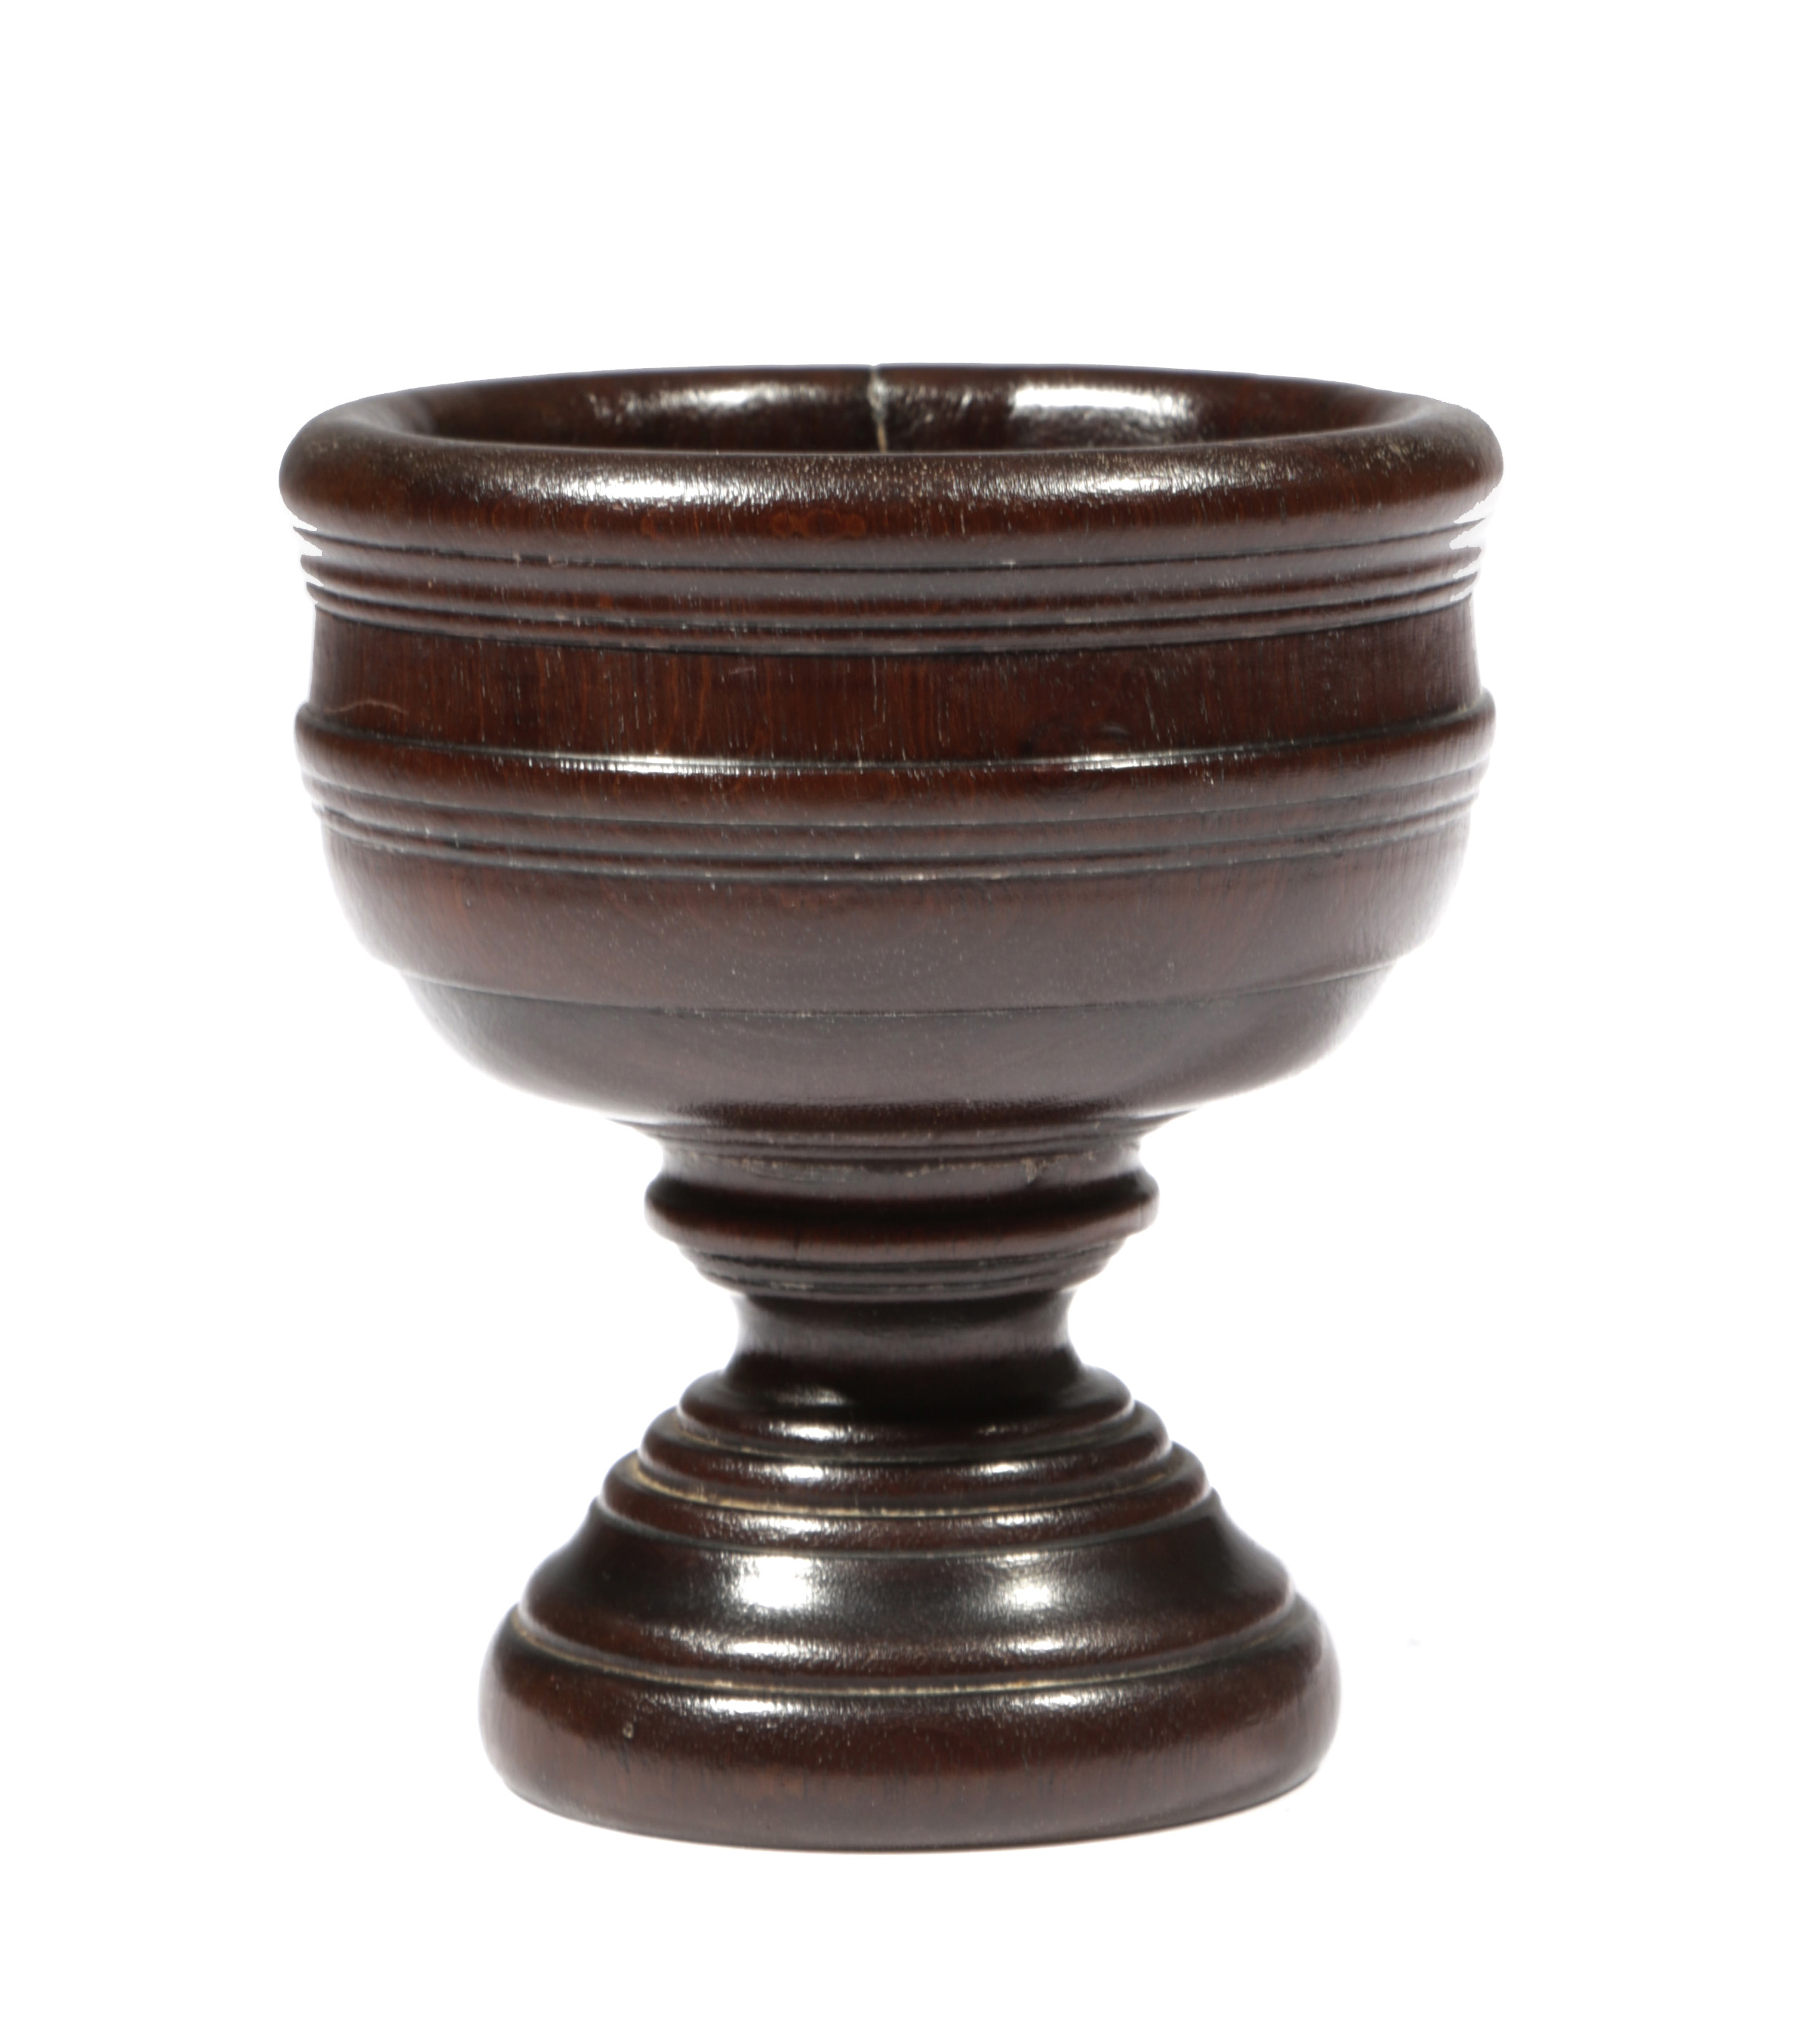 A TREEN SALT 18TH CENTURY possibly walnut, the bowl decorated with reeded bands 11.2cm high